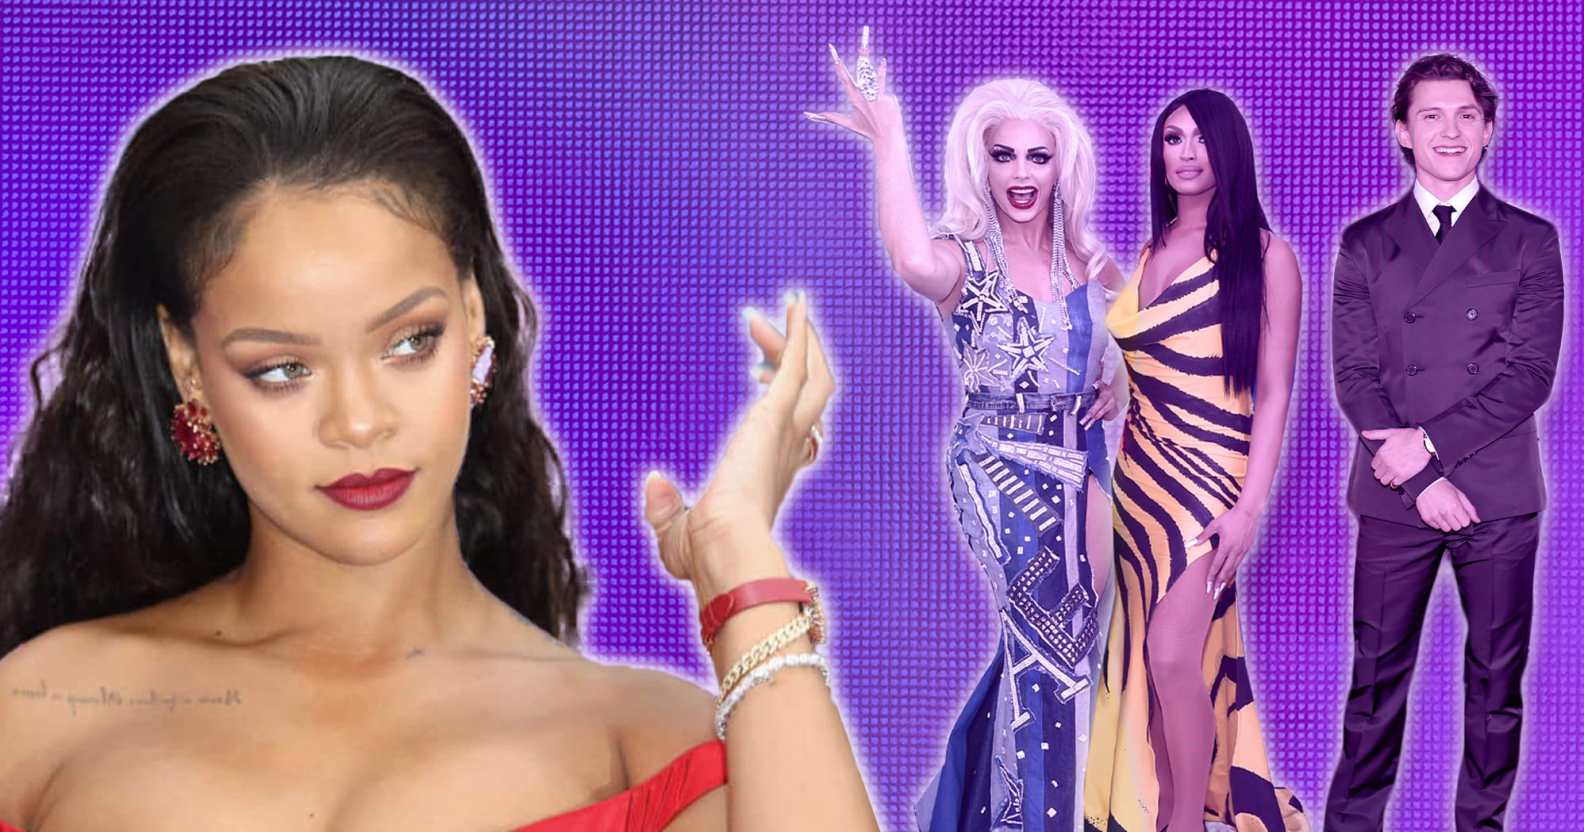 Rihanna pictured on the left against a purple background with Tatianna, Alyssa Edwards and Tom Holland on the right.